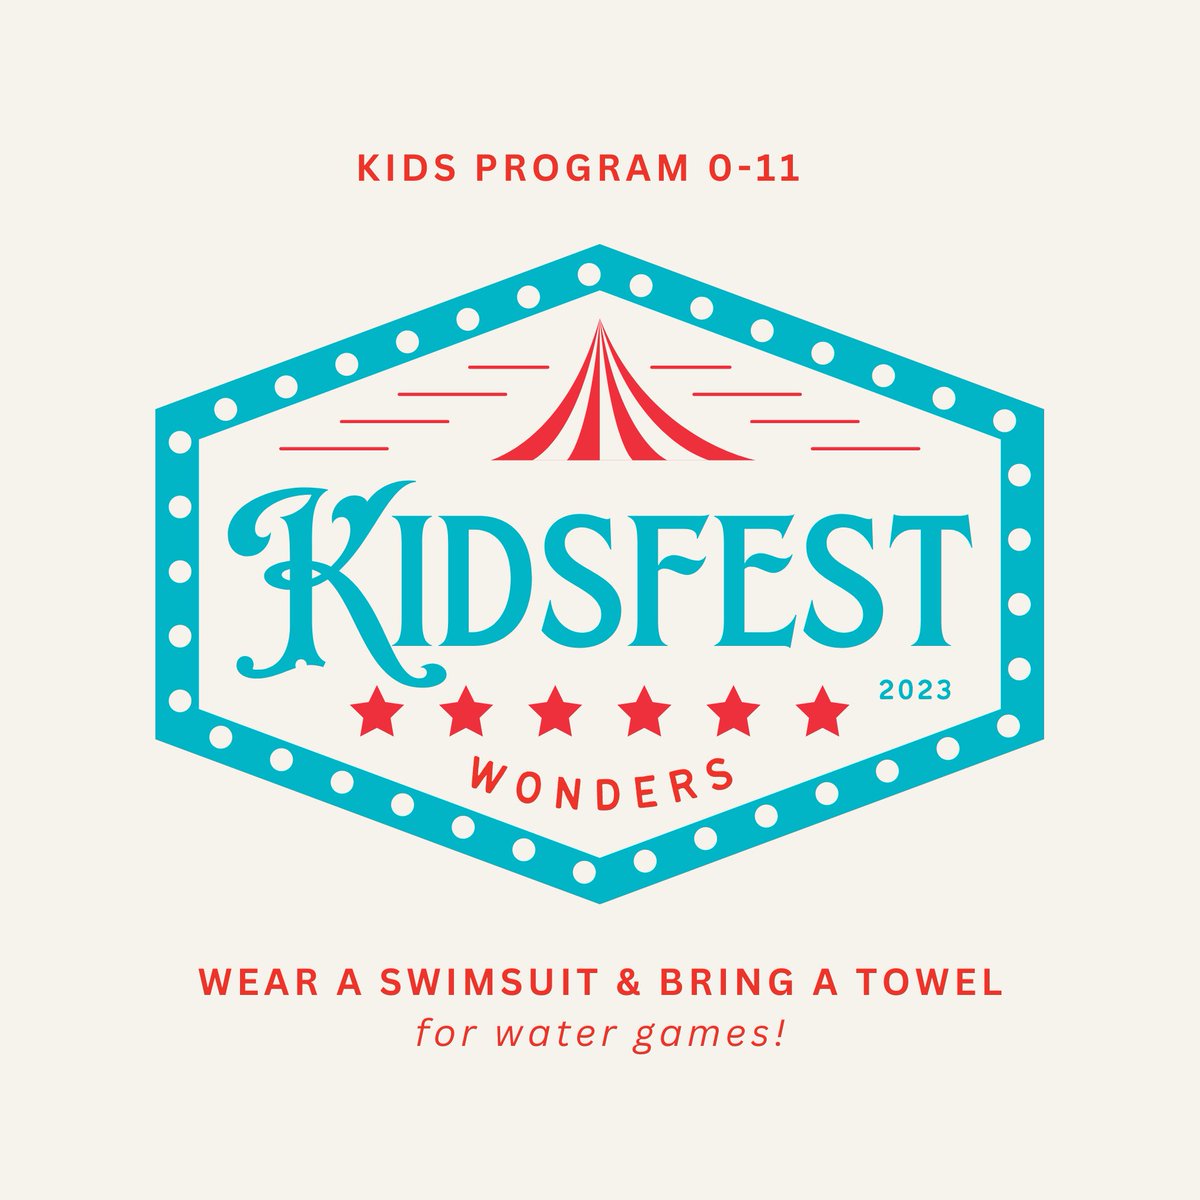 Join us this evening for Summerfest and Kidsfest! We are excited to have Mark Spence from Living Waters Ministry teach on the miracles of Jesus.

Kidsfest drop-off begins at 6:00 pm in the Generations building and Summerfest begins at 6:30 pm in the Worship Center! #gcvsummerfest